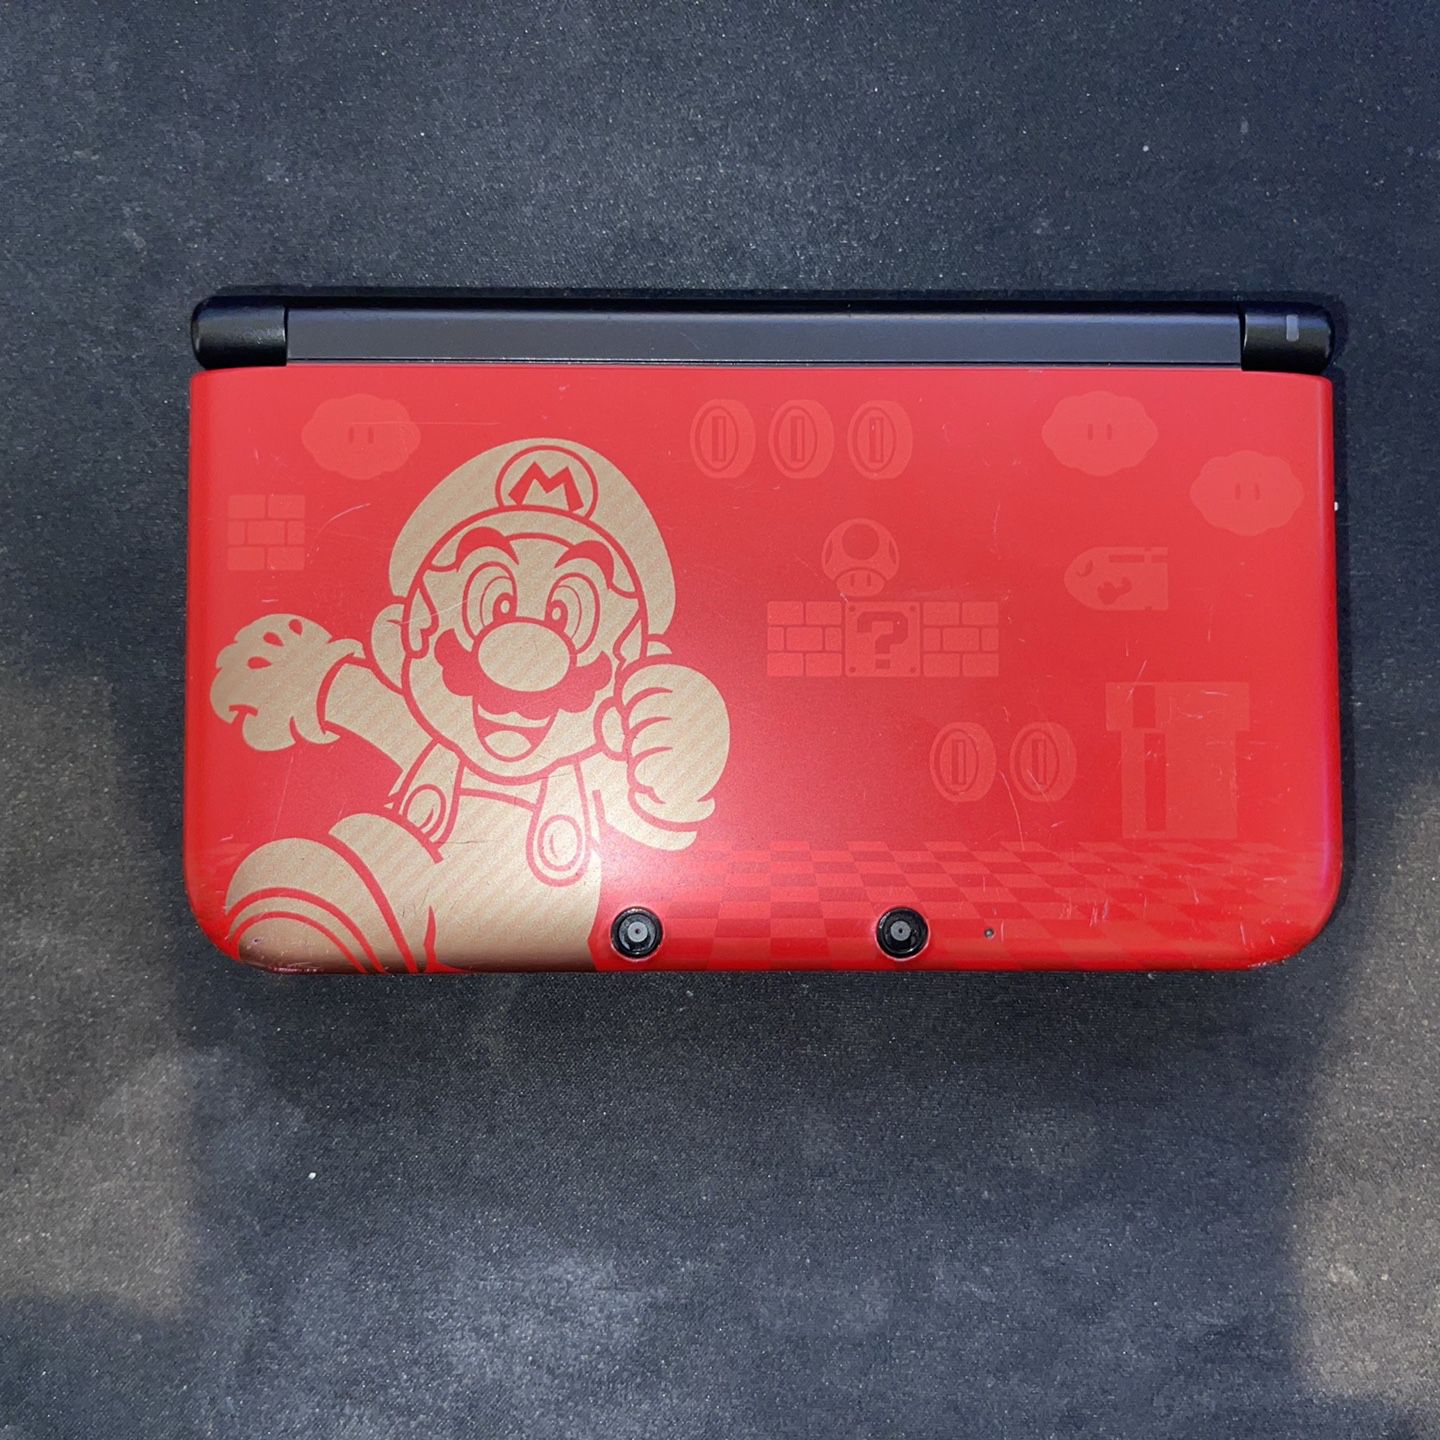 Nintendo 3DS XL with Homebrew